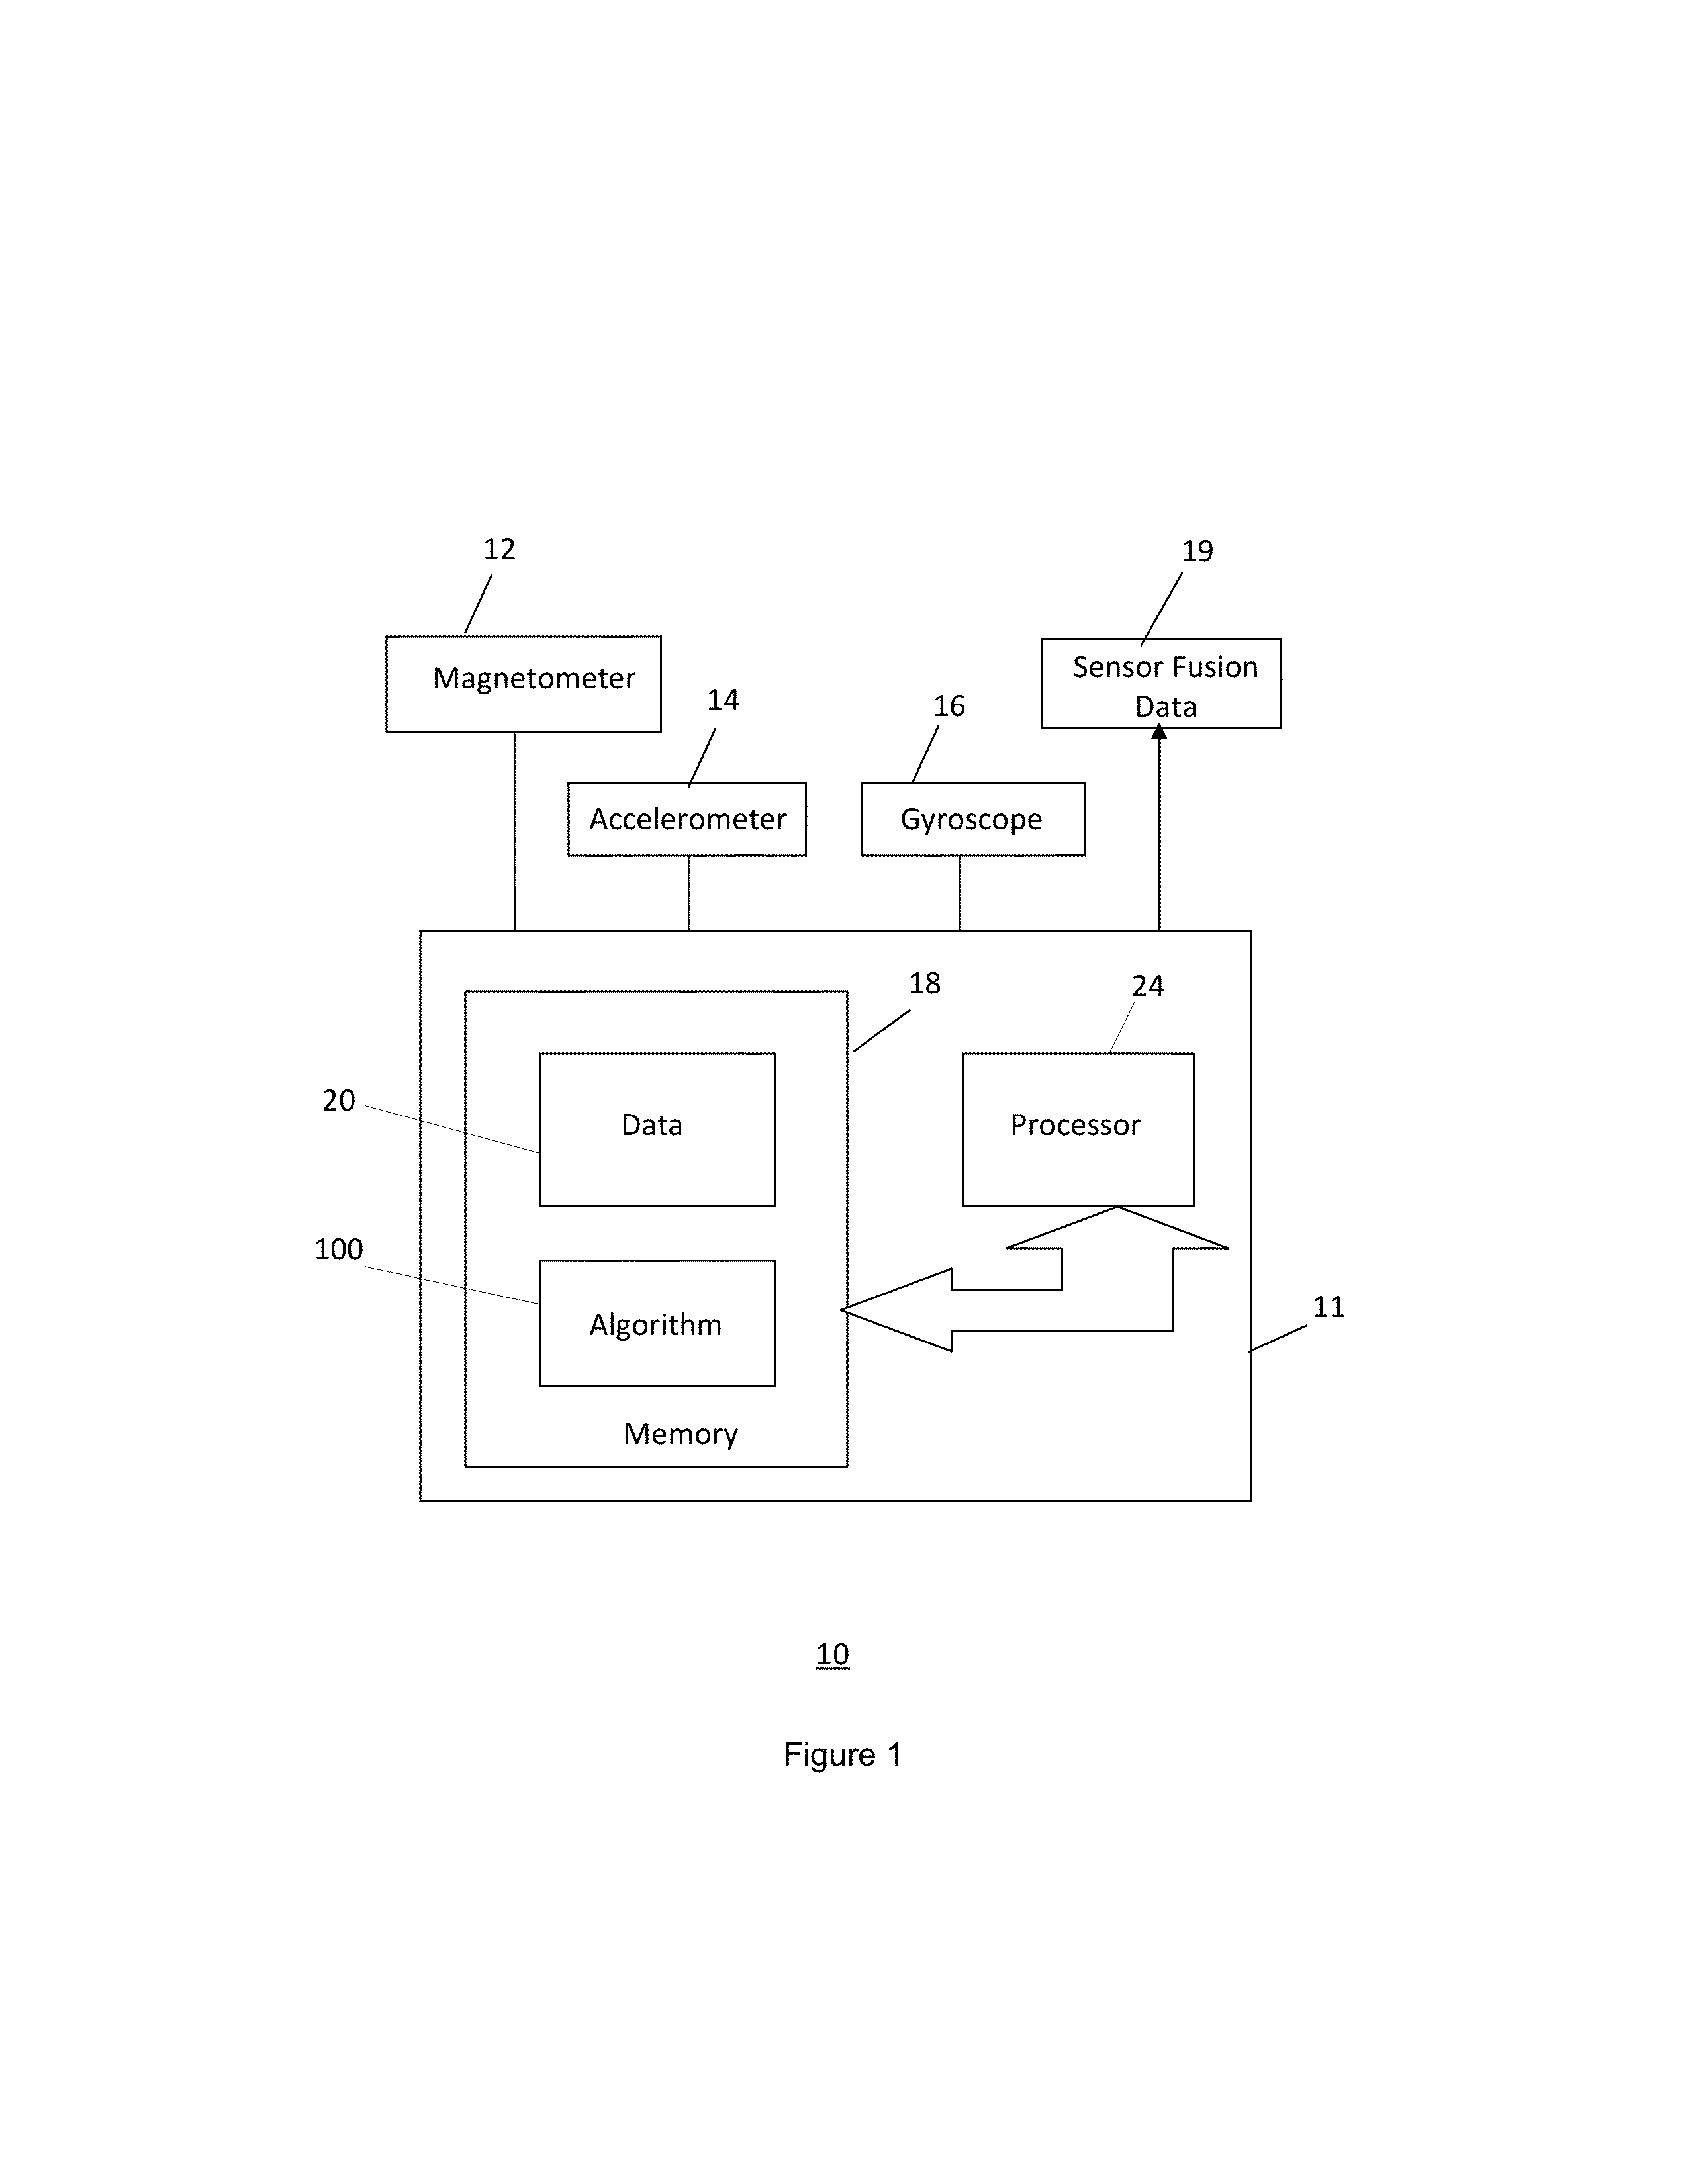 Activity classification in a multi-axis activity monitor device